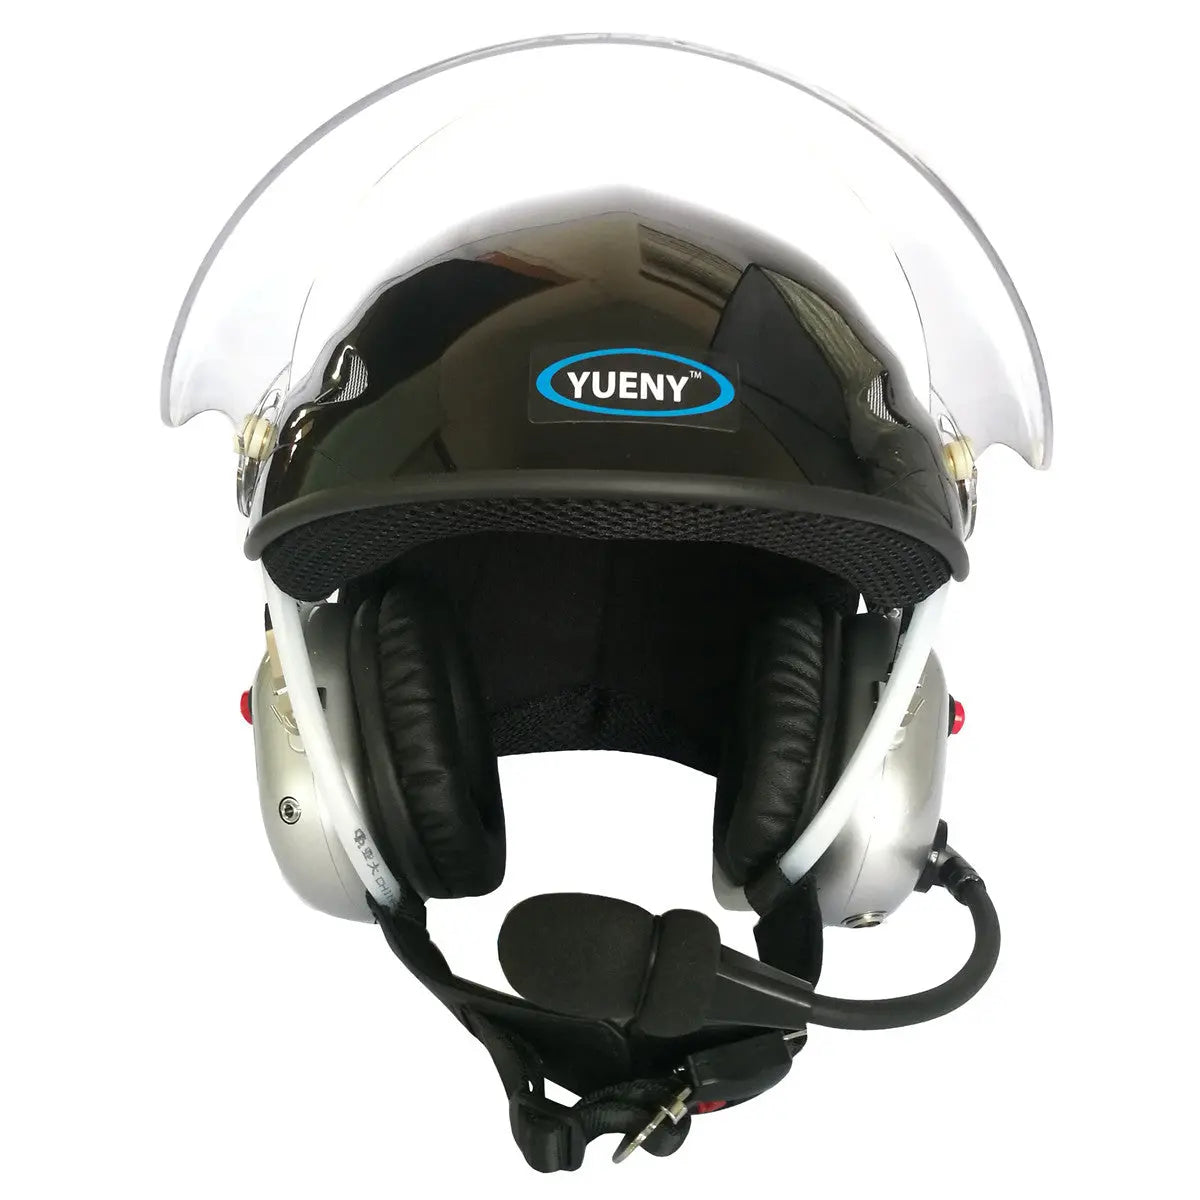 YUENY YPHH-2000F-BT18 paramotor helmet with noise canceling headset FREE with BLUETOOTH Adapter powered paragliding YUENY